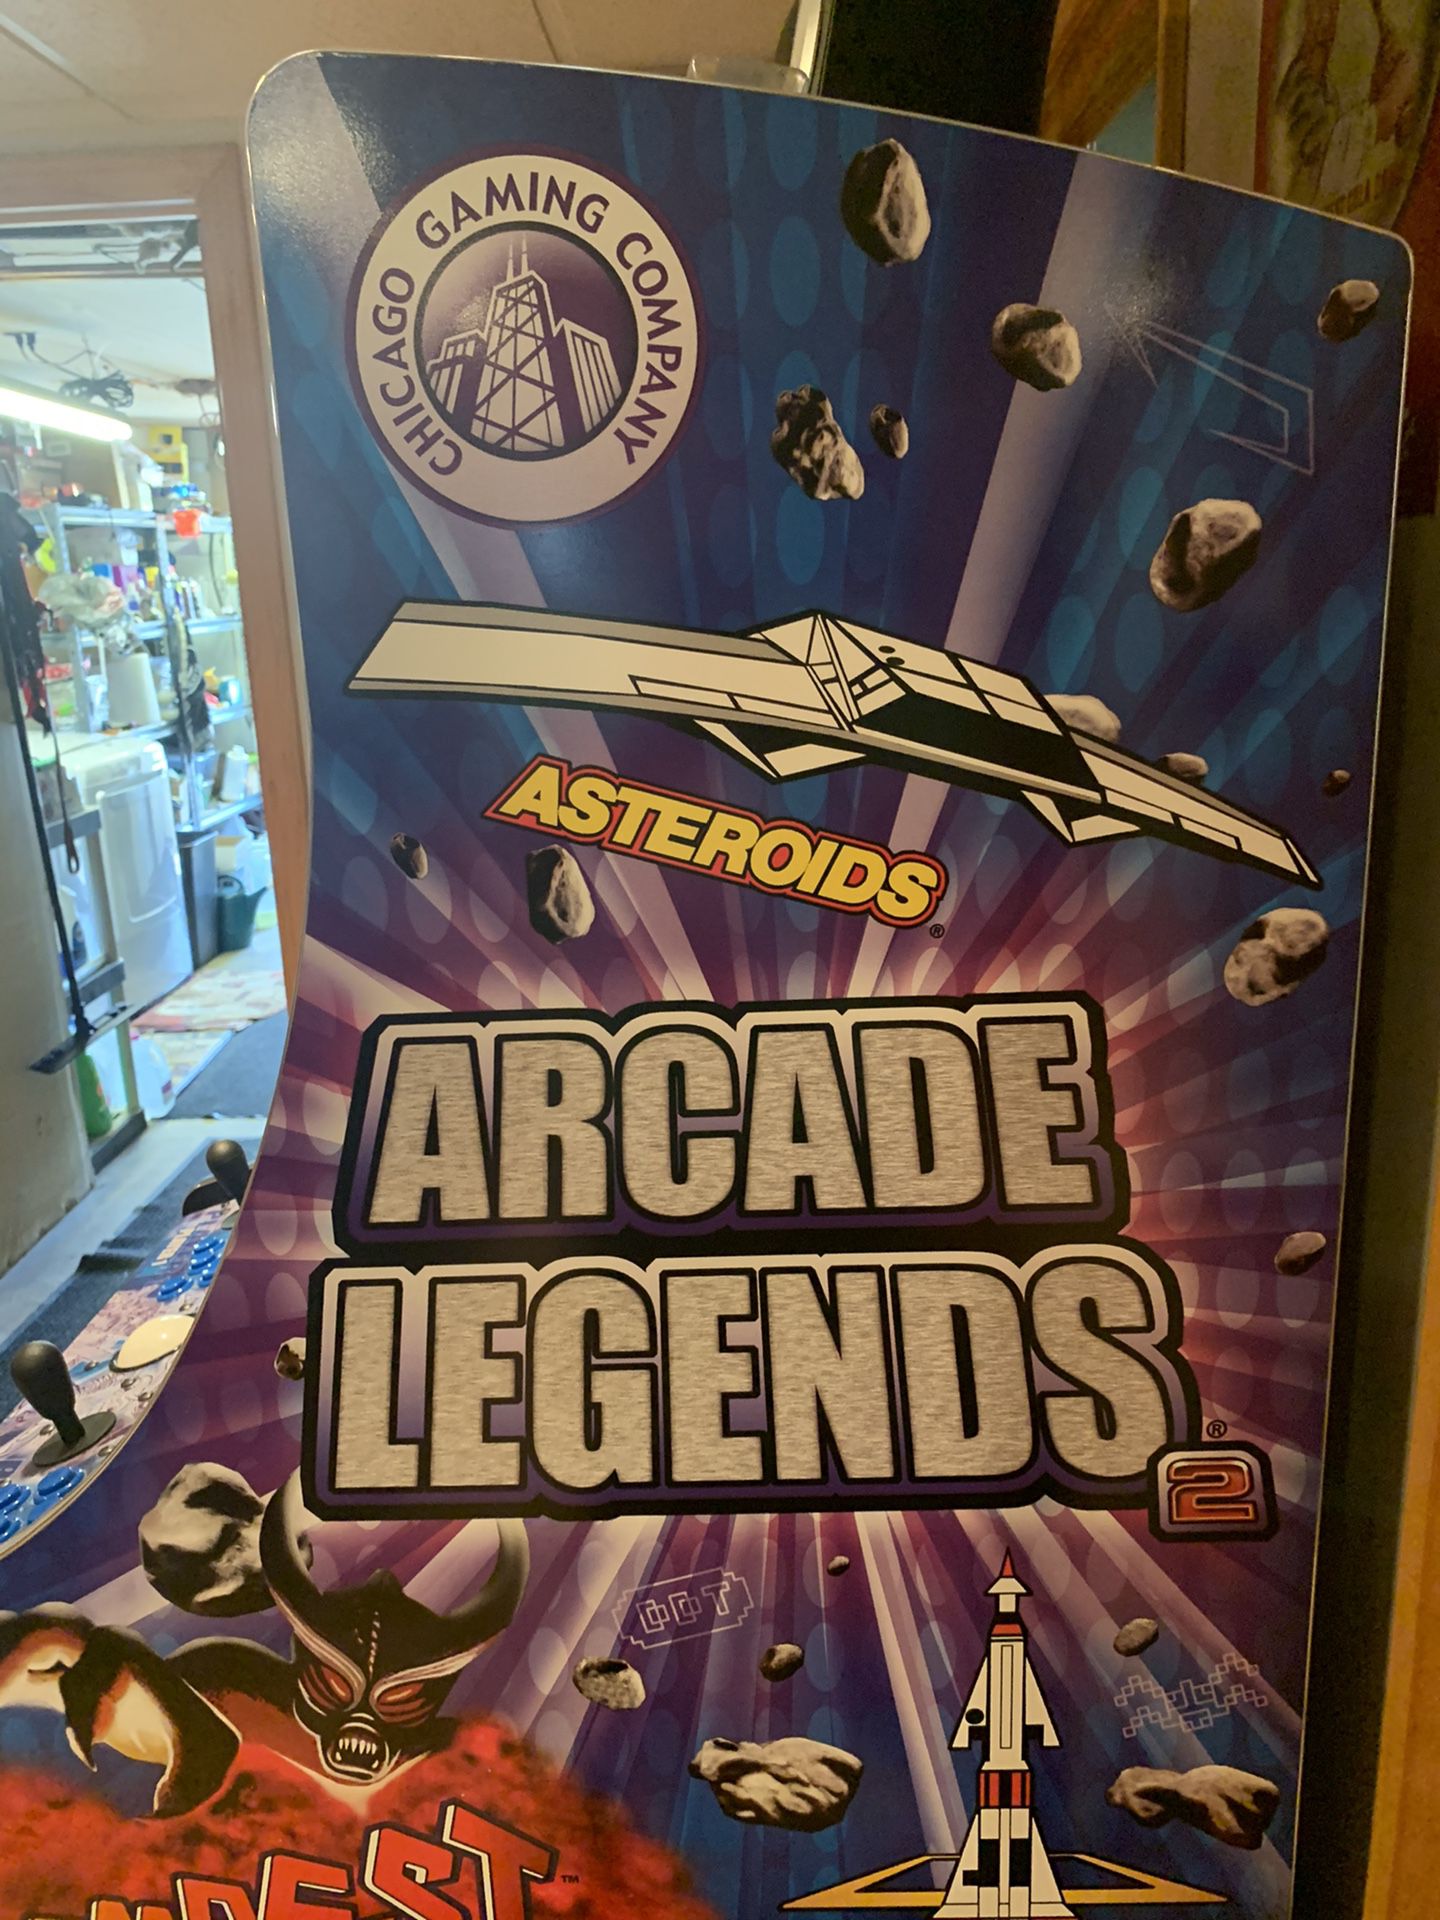 Arcade game multiple games in one